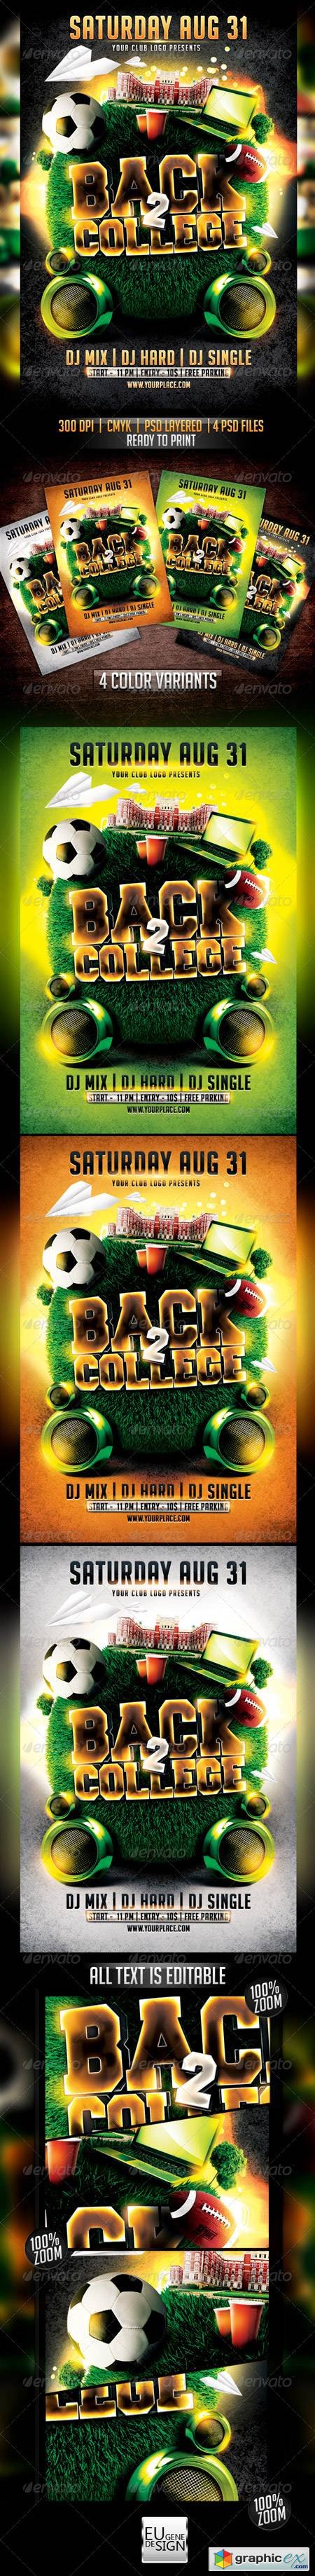 Back to College Flyer Template